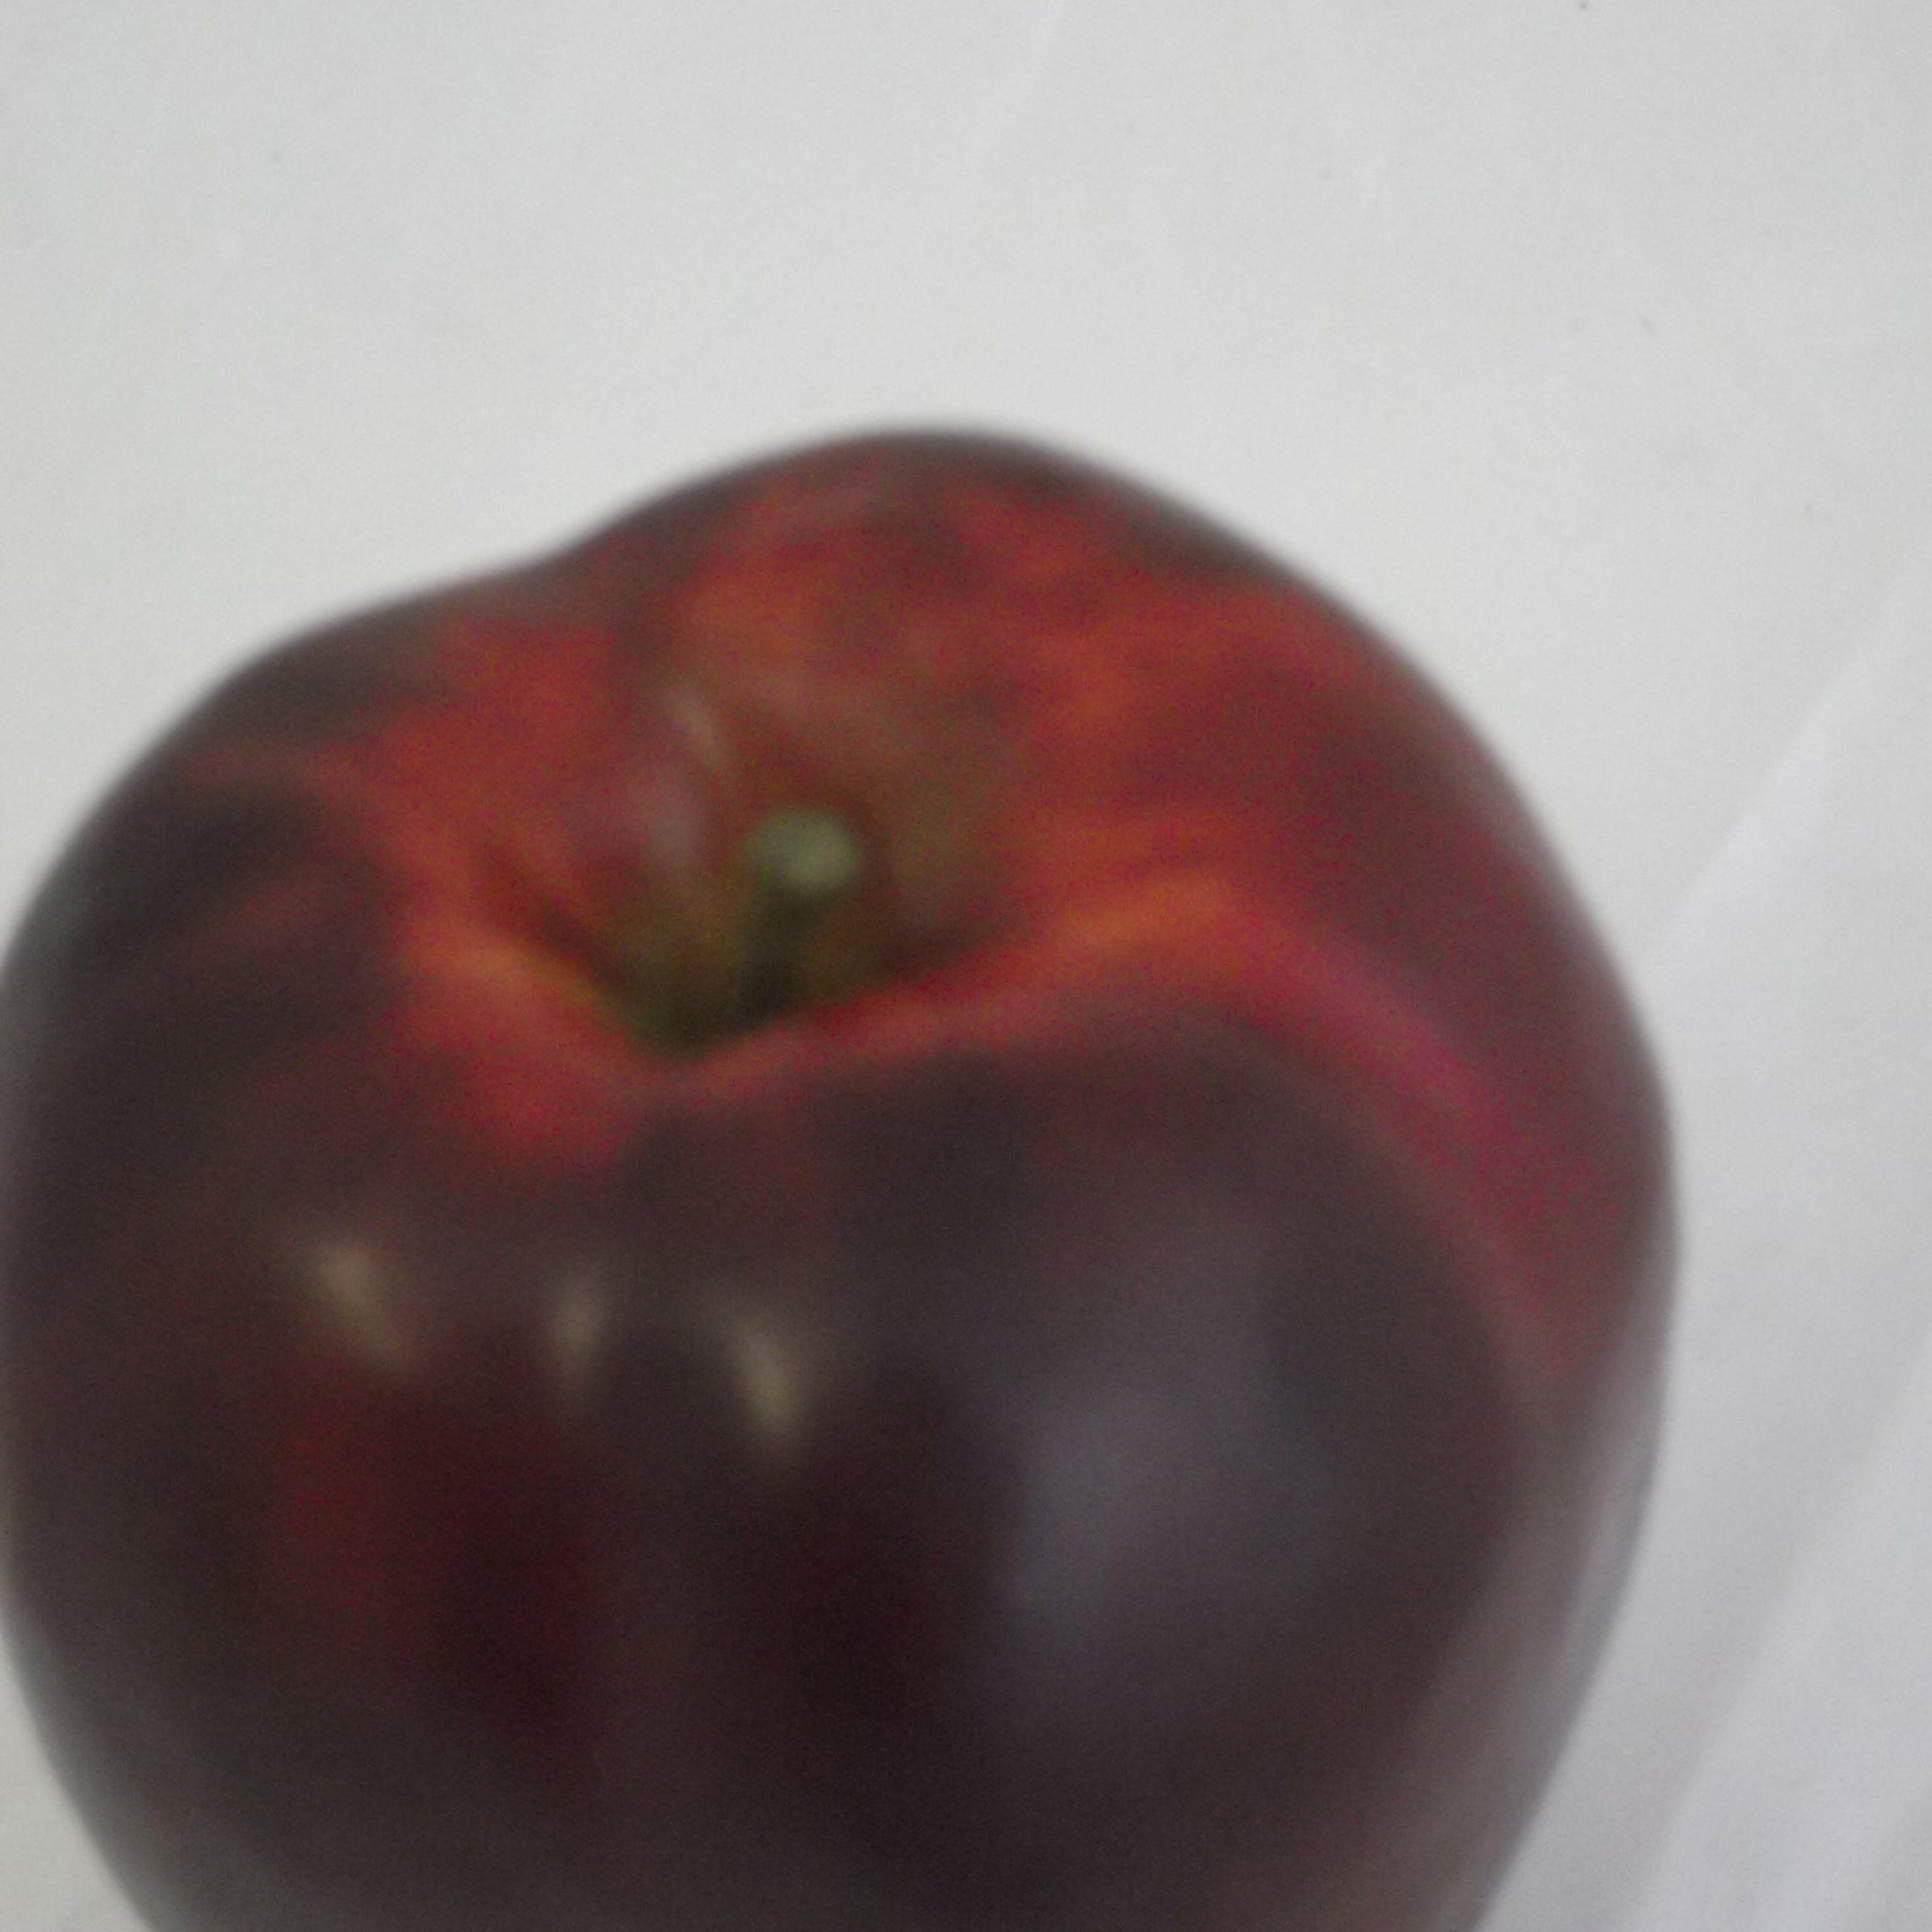 Artificial Weighted Red Delicious Apple